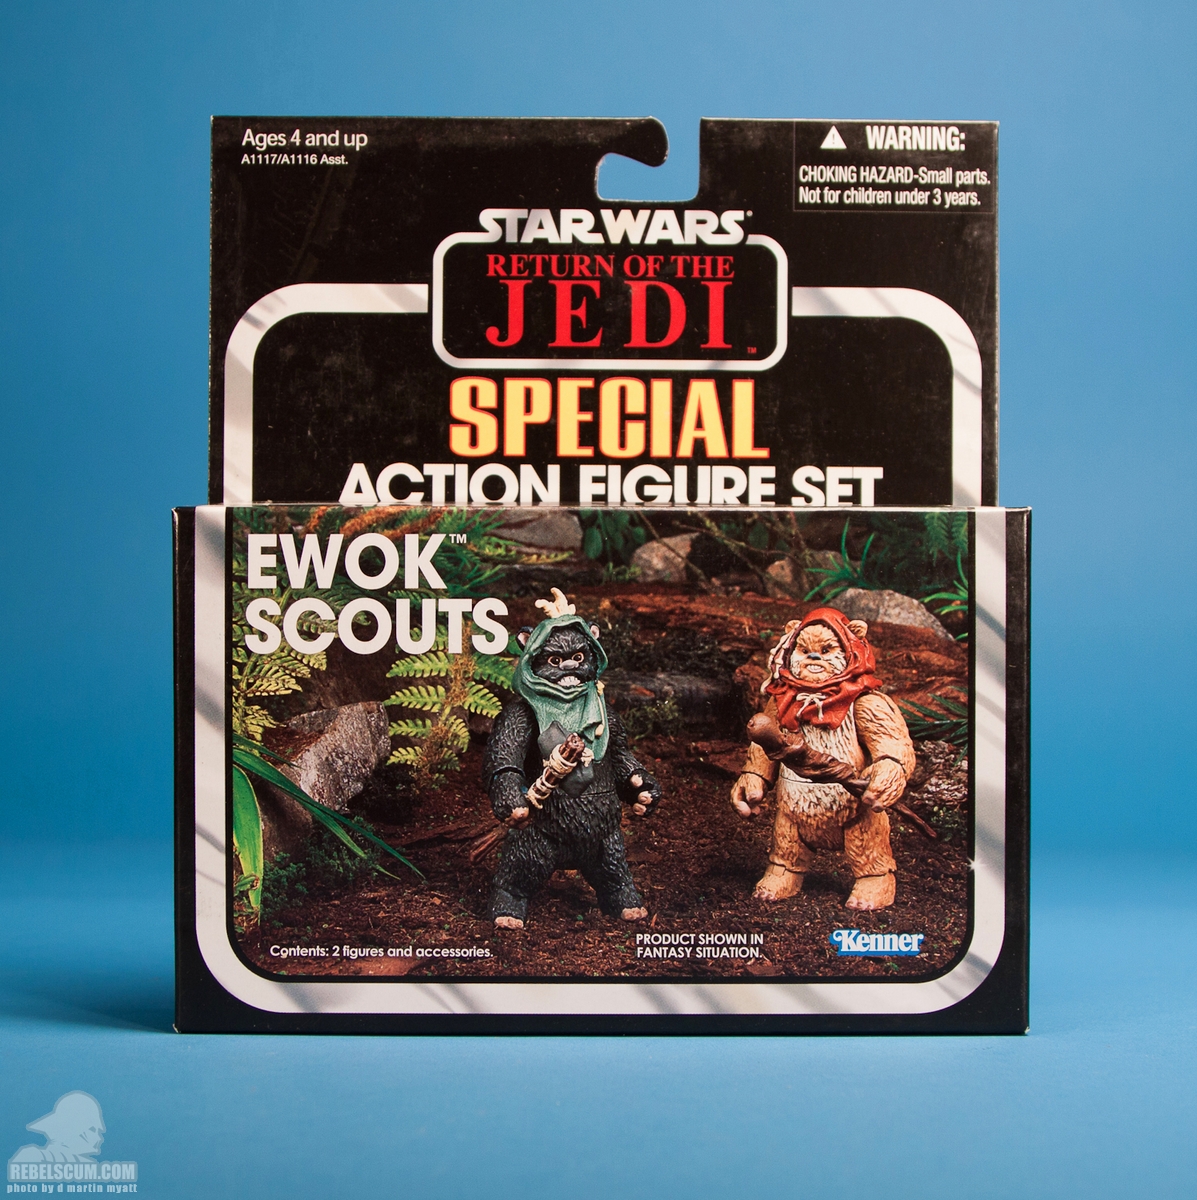 Ewok_Scouts_The_Vintage_Collection_TVC_Kmart-52.jpg